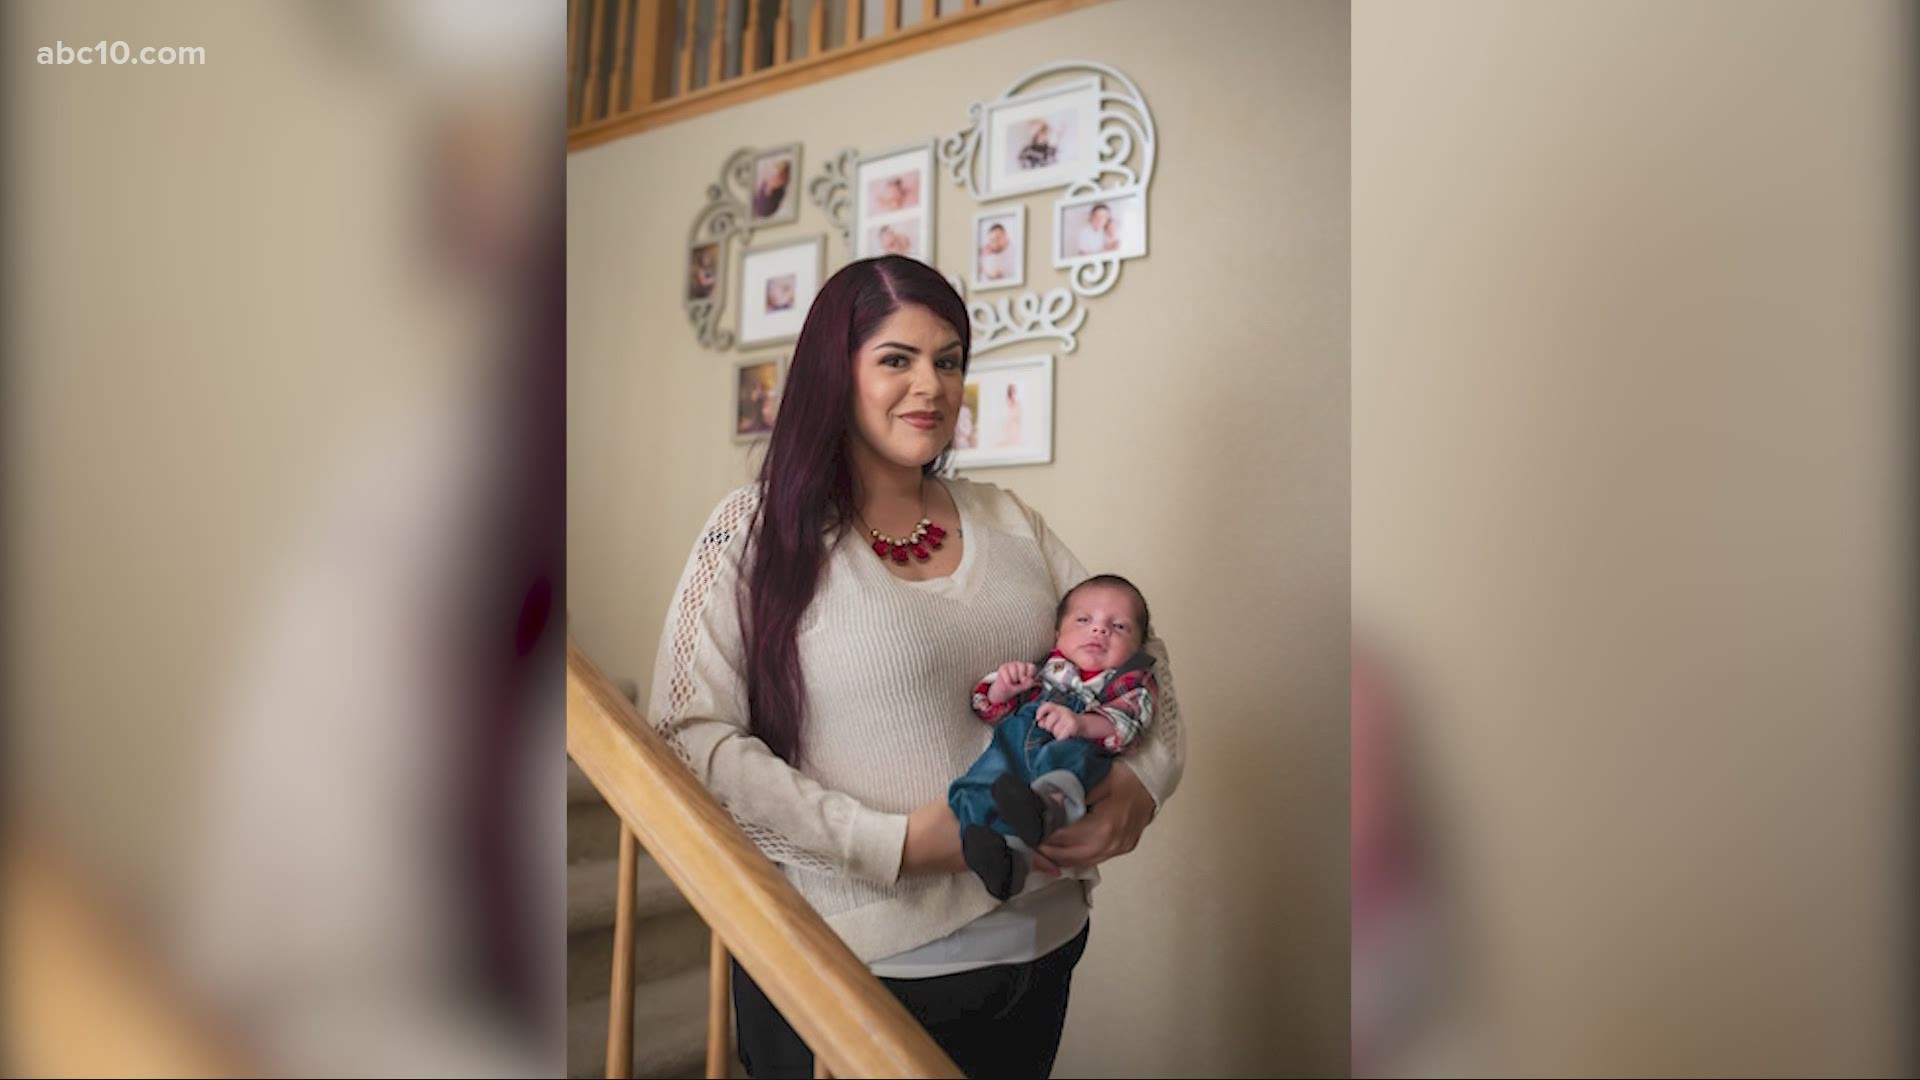 Diana Estrada Arauza gave birth to a baby just hours after she was intubated while suffering from COVID-19.